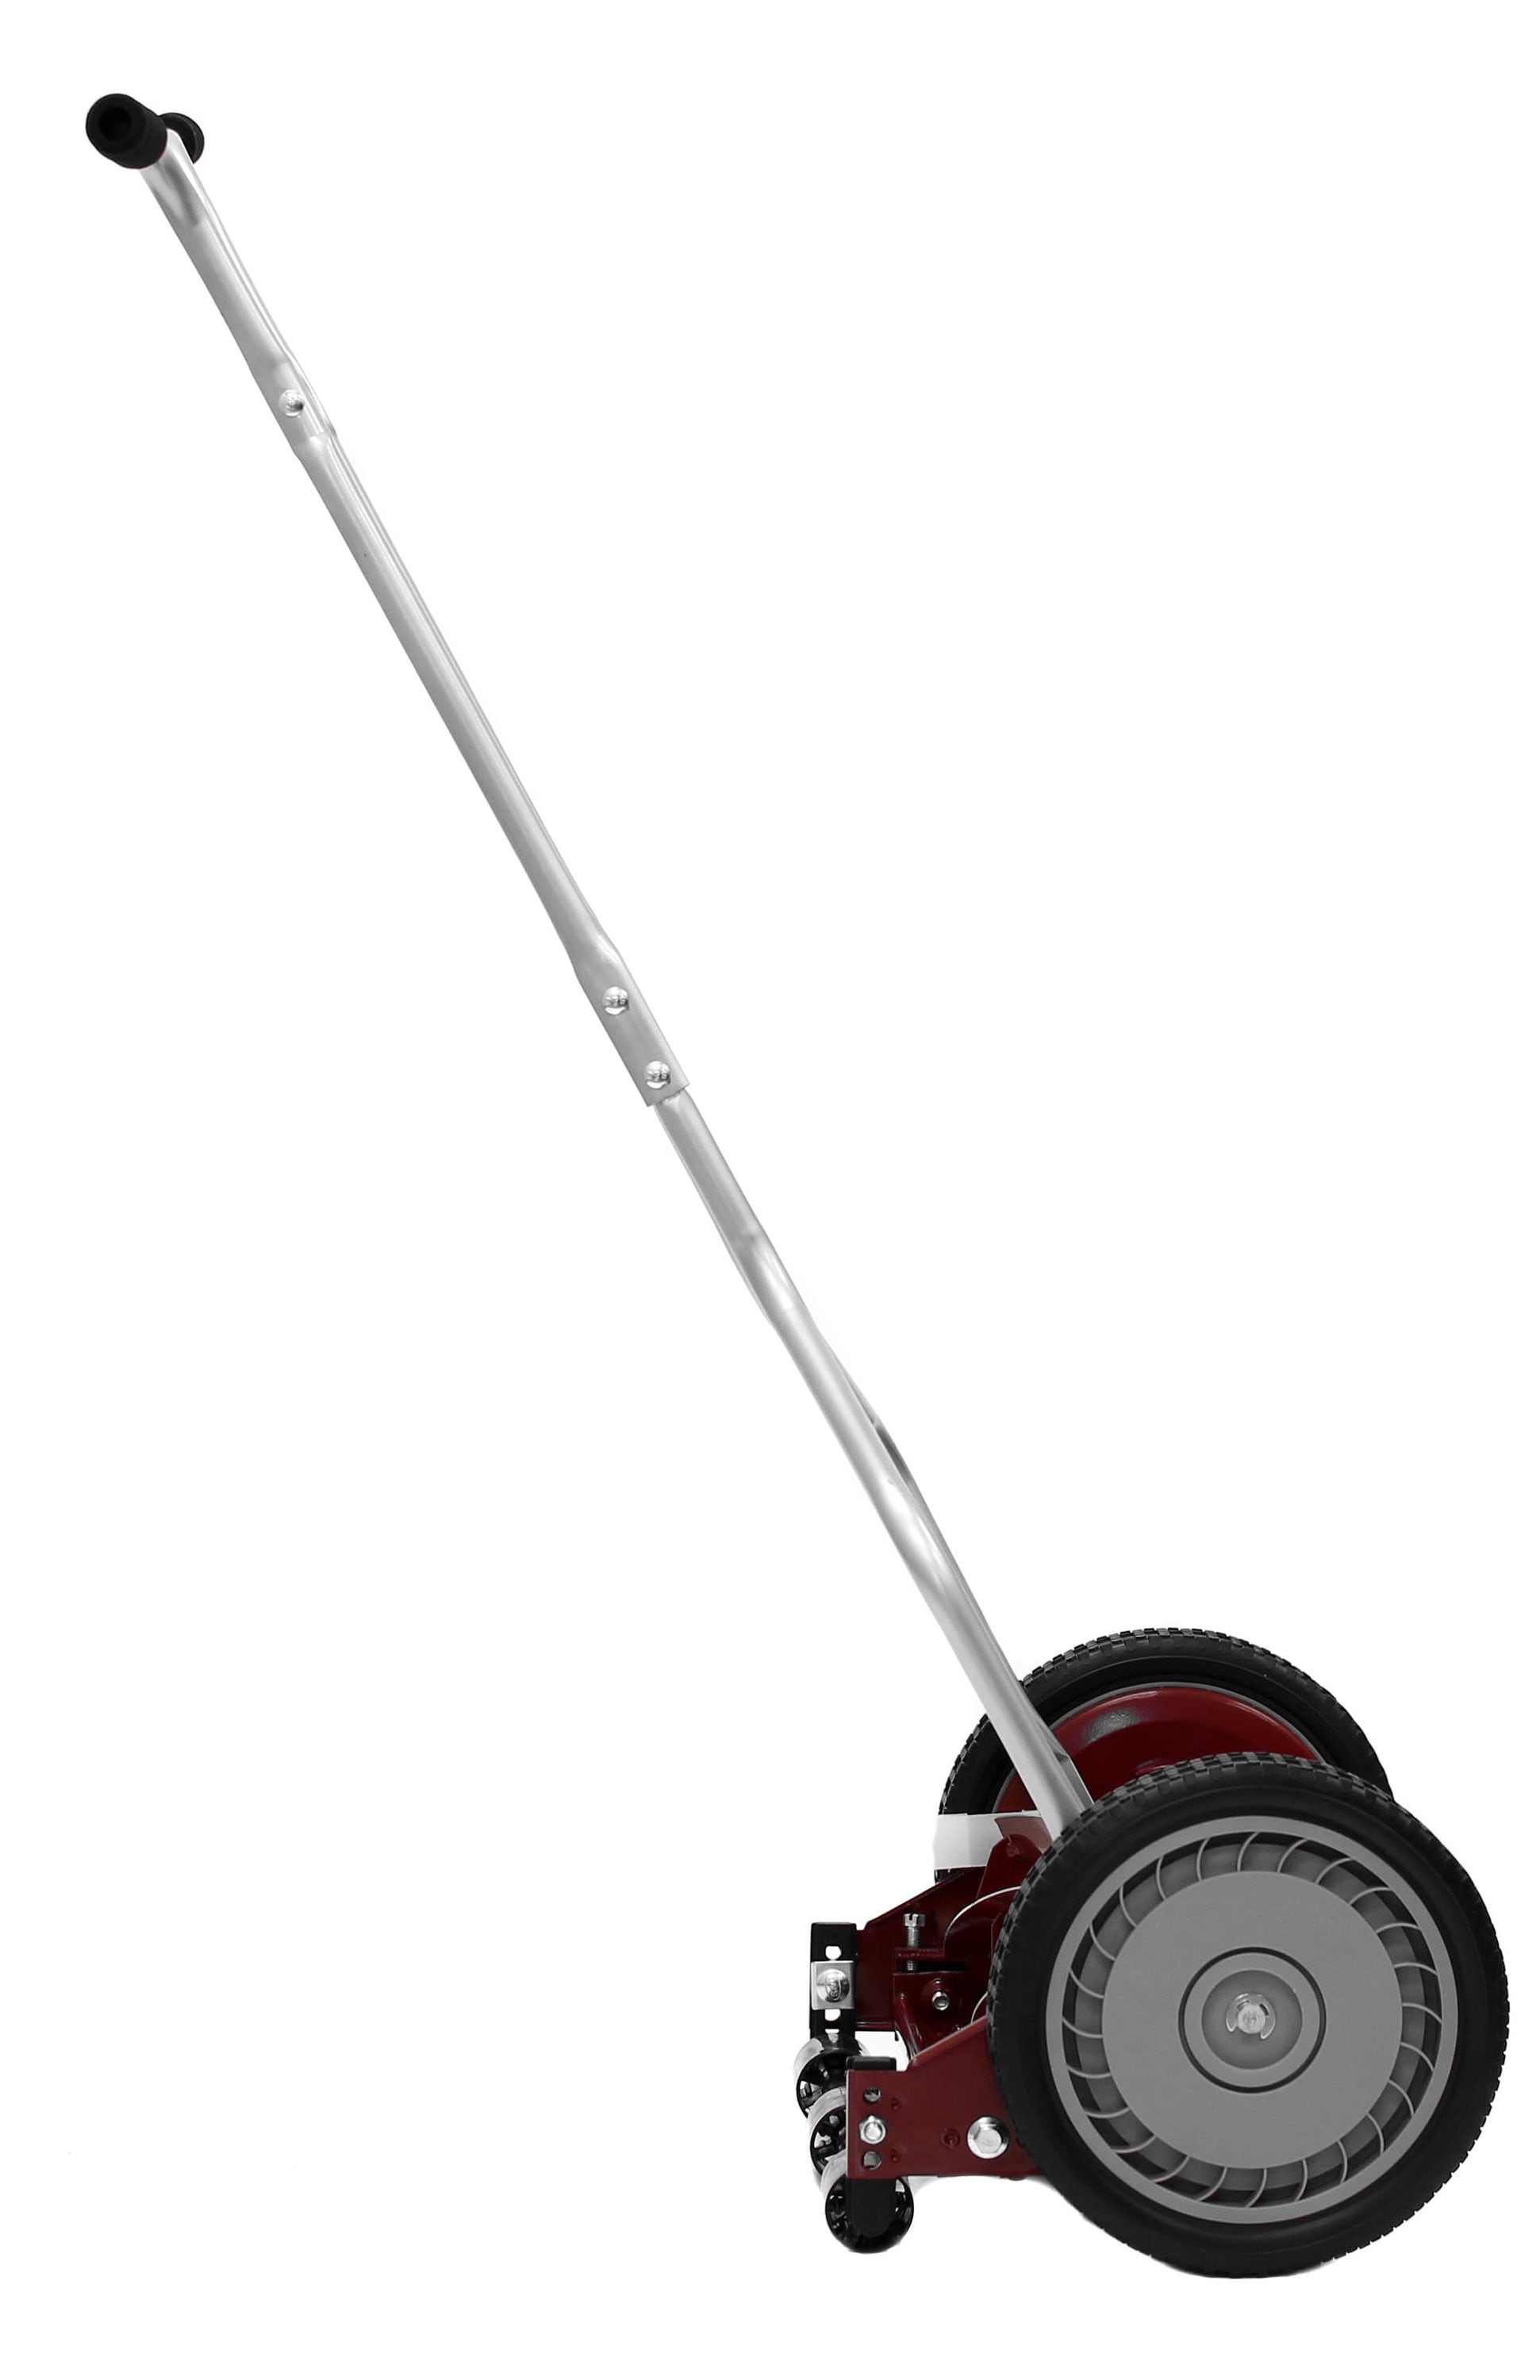 American Lawn Mower 14-Inch Reel Lawn Mower with 5-Blade Ball